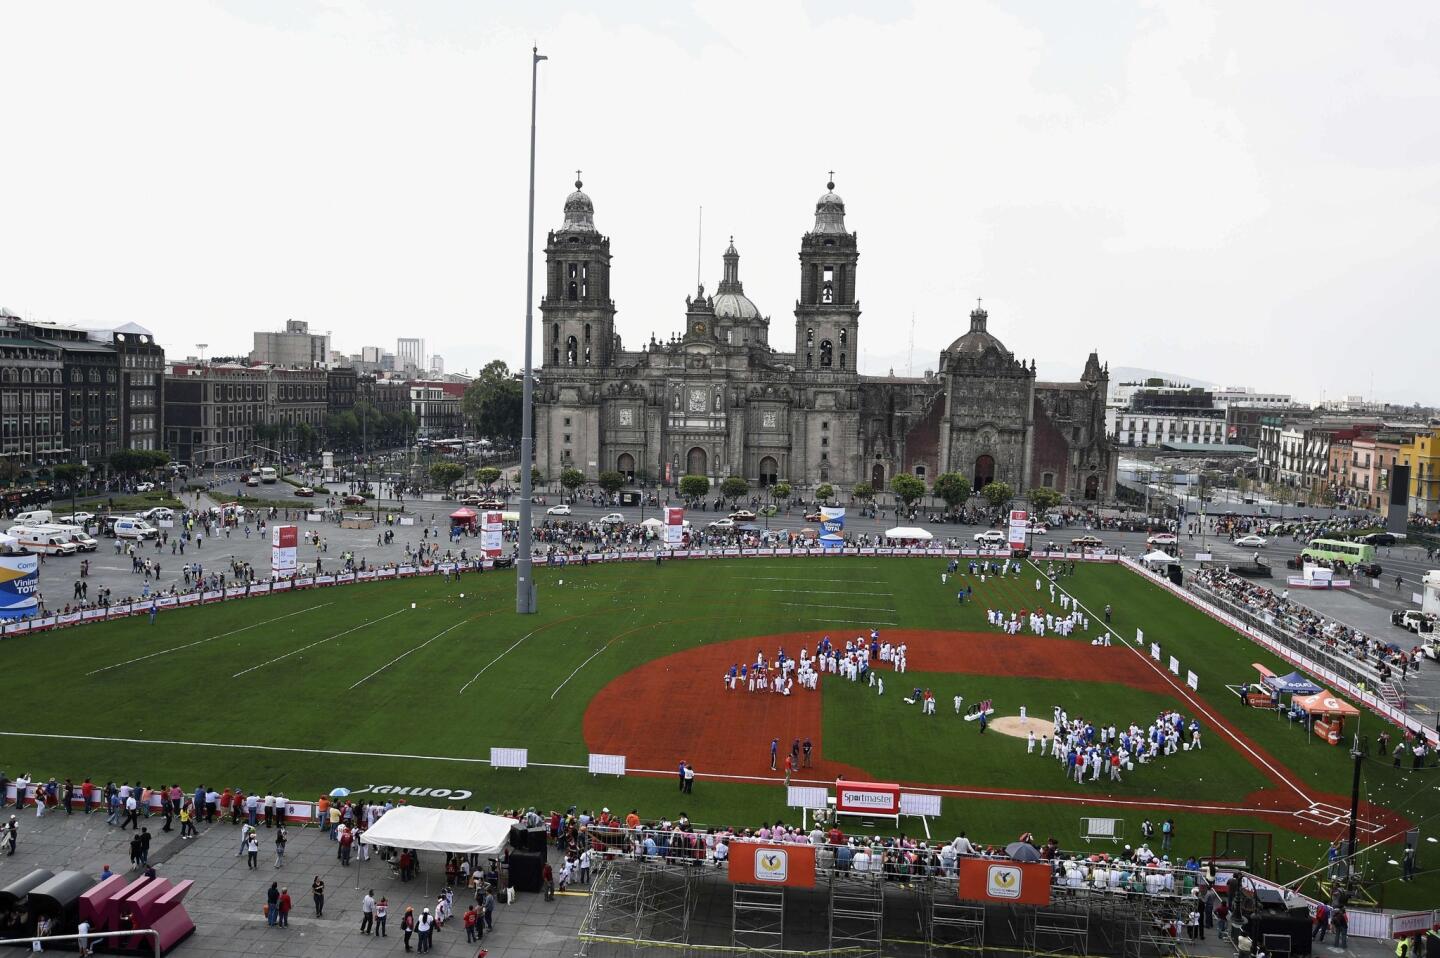 Young players train during the first day of the 90th anniversary of the Mexican Baseball League to be celebrated this weekend, at Mexico City's Zocalo square, on June 12, 2015. AFP PHOTO/ALFREDO ESTRELLAALFREDO ESTRELLA/AFP/Getty Images ** OUTS - ELSENT, FPG - OUTS * NM, PH, VA if sourced by CT, LA or MoD **